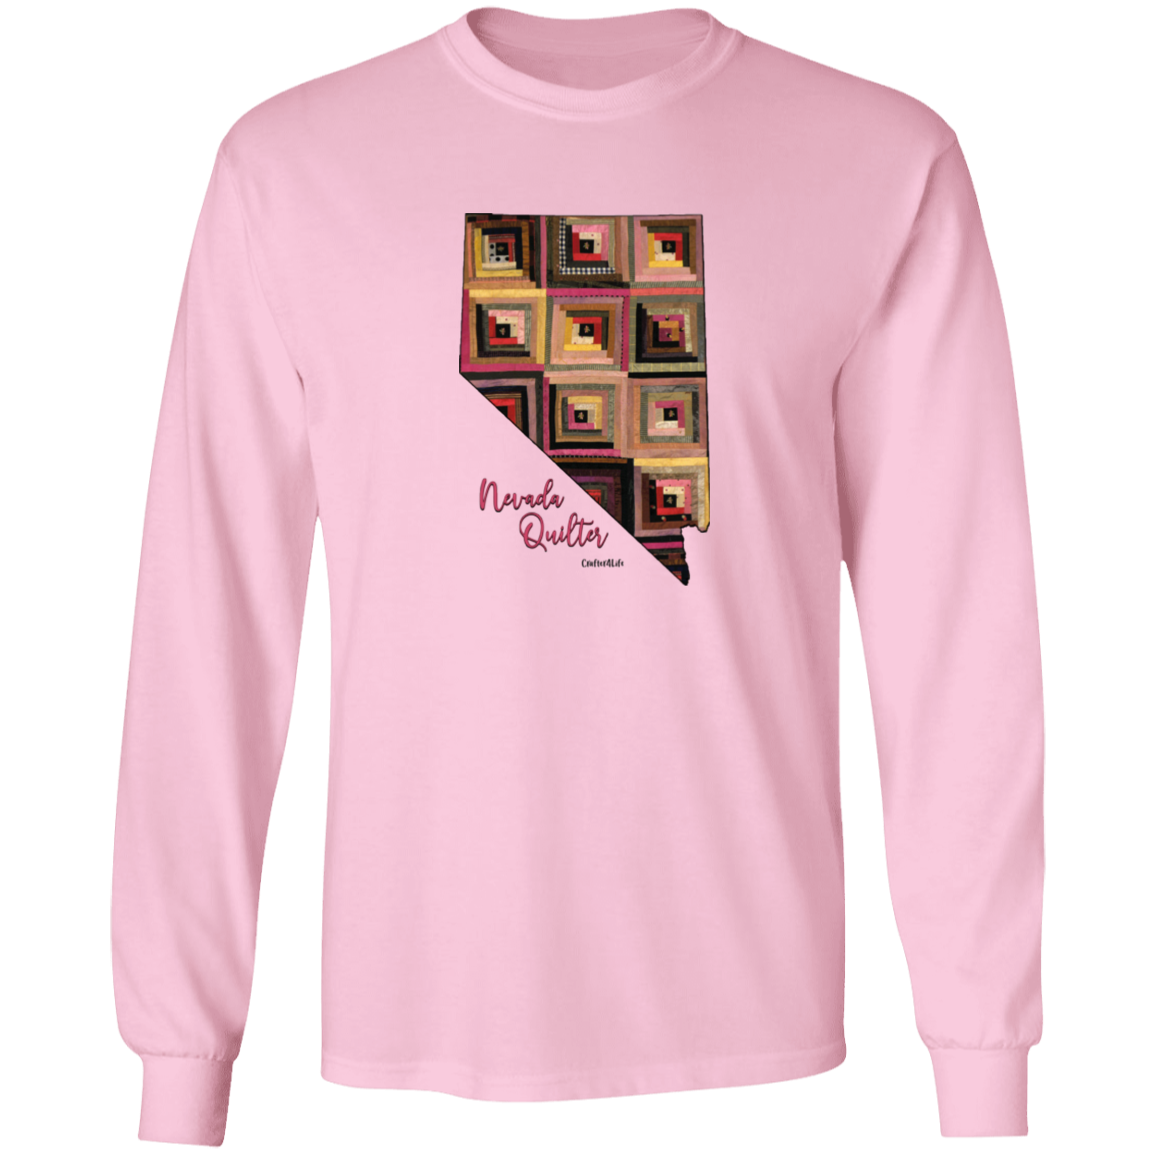 Nevada Quilter Long Sleeve T-Shirt, Gift for Quilting Friends and Family